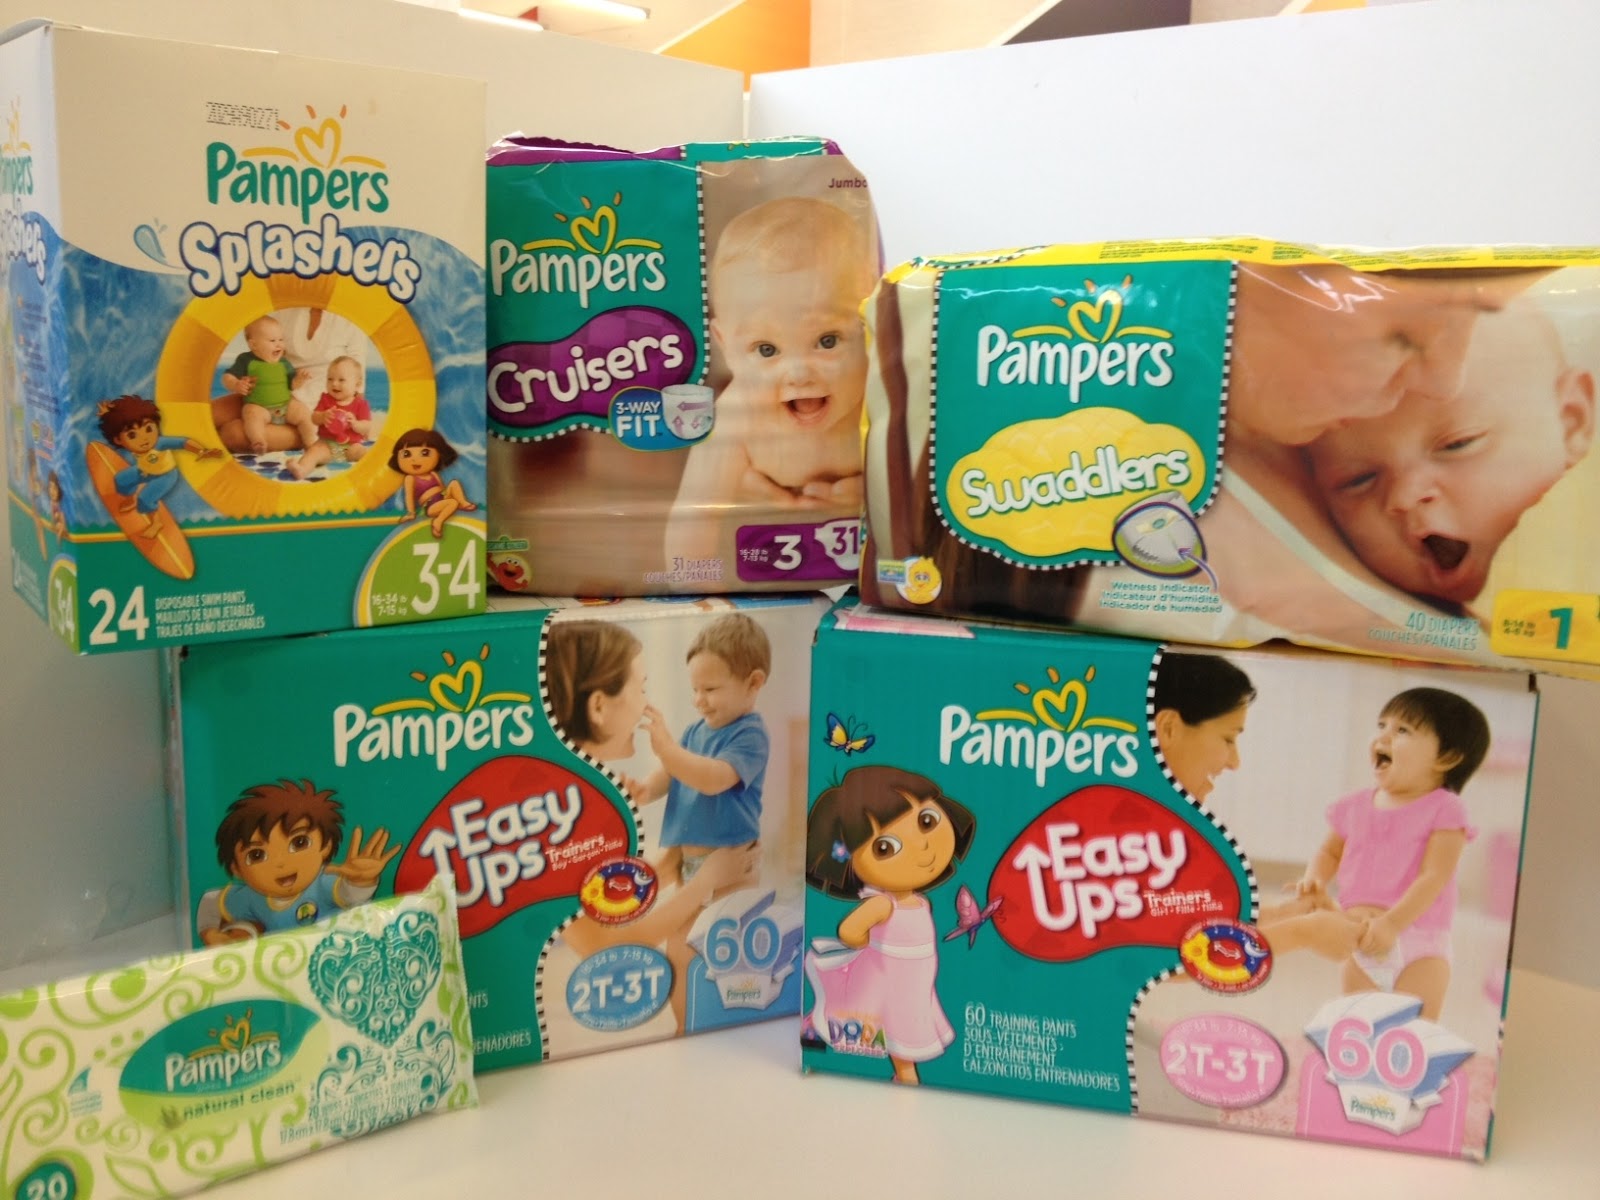 https://1.bp.blogspot.com/-S8MjYiybjEE/UPODjmUd28I/AAAAAAAAFZs/K0JnxP3UJeo/s1600/Pampers+Win+Diapers+for+a+Year+Giveaway+Image.JPG